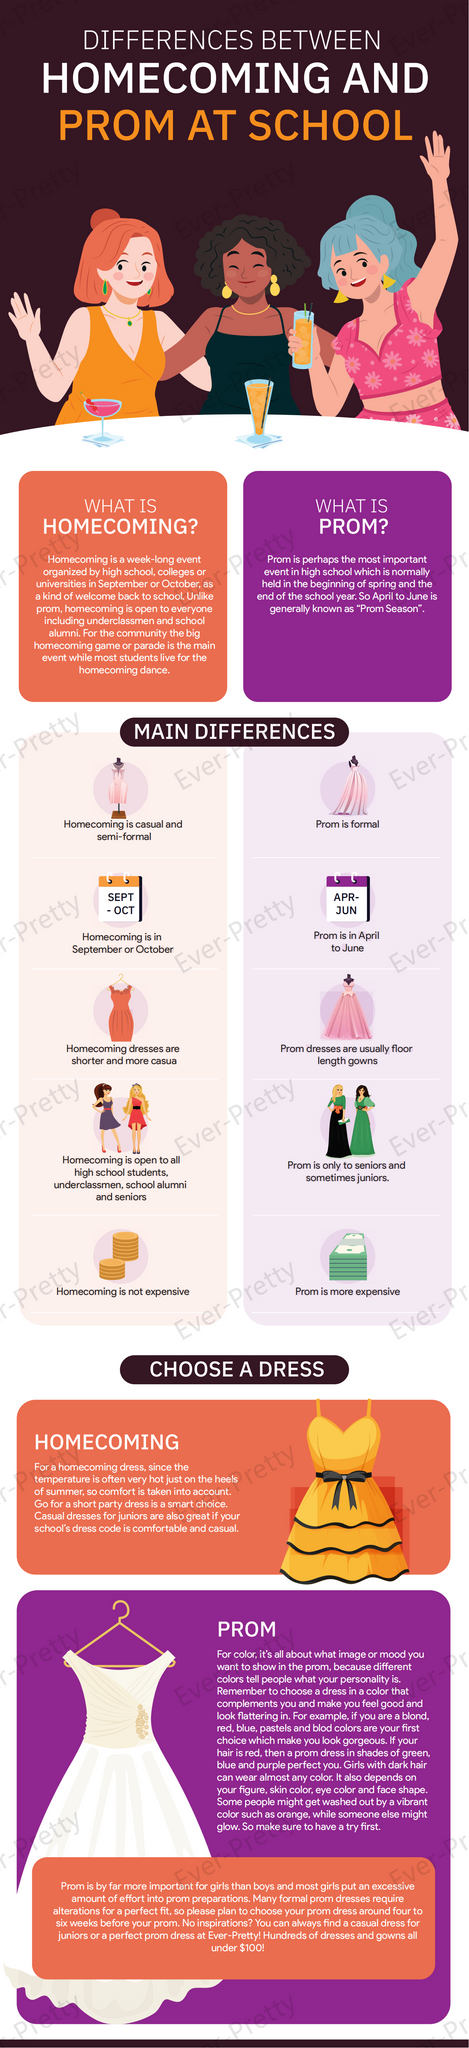 differences between prom and homecoming infographic